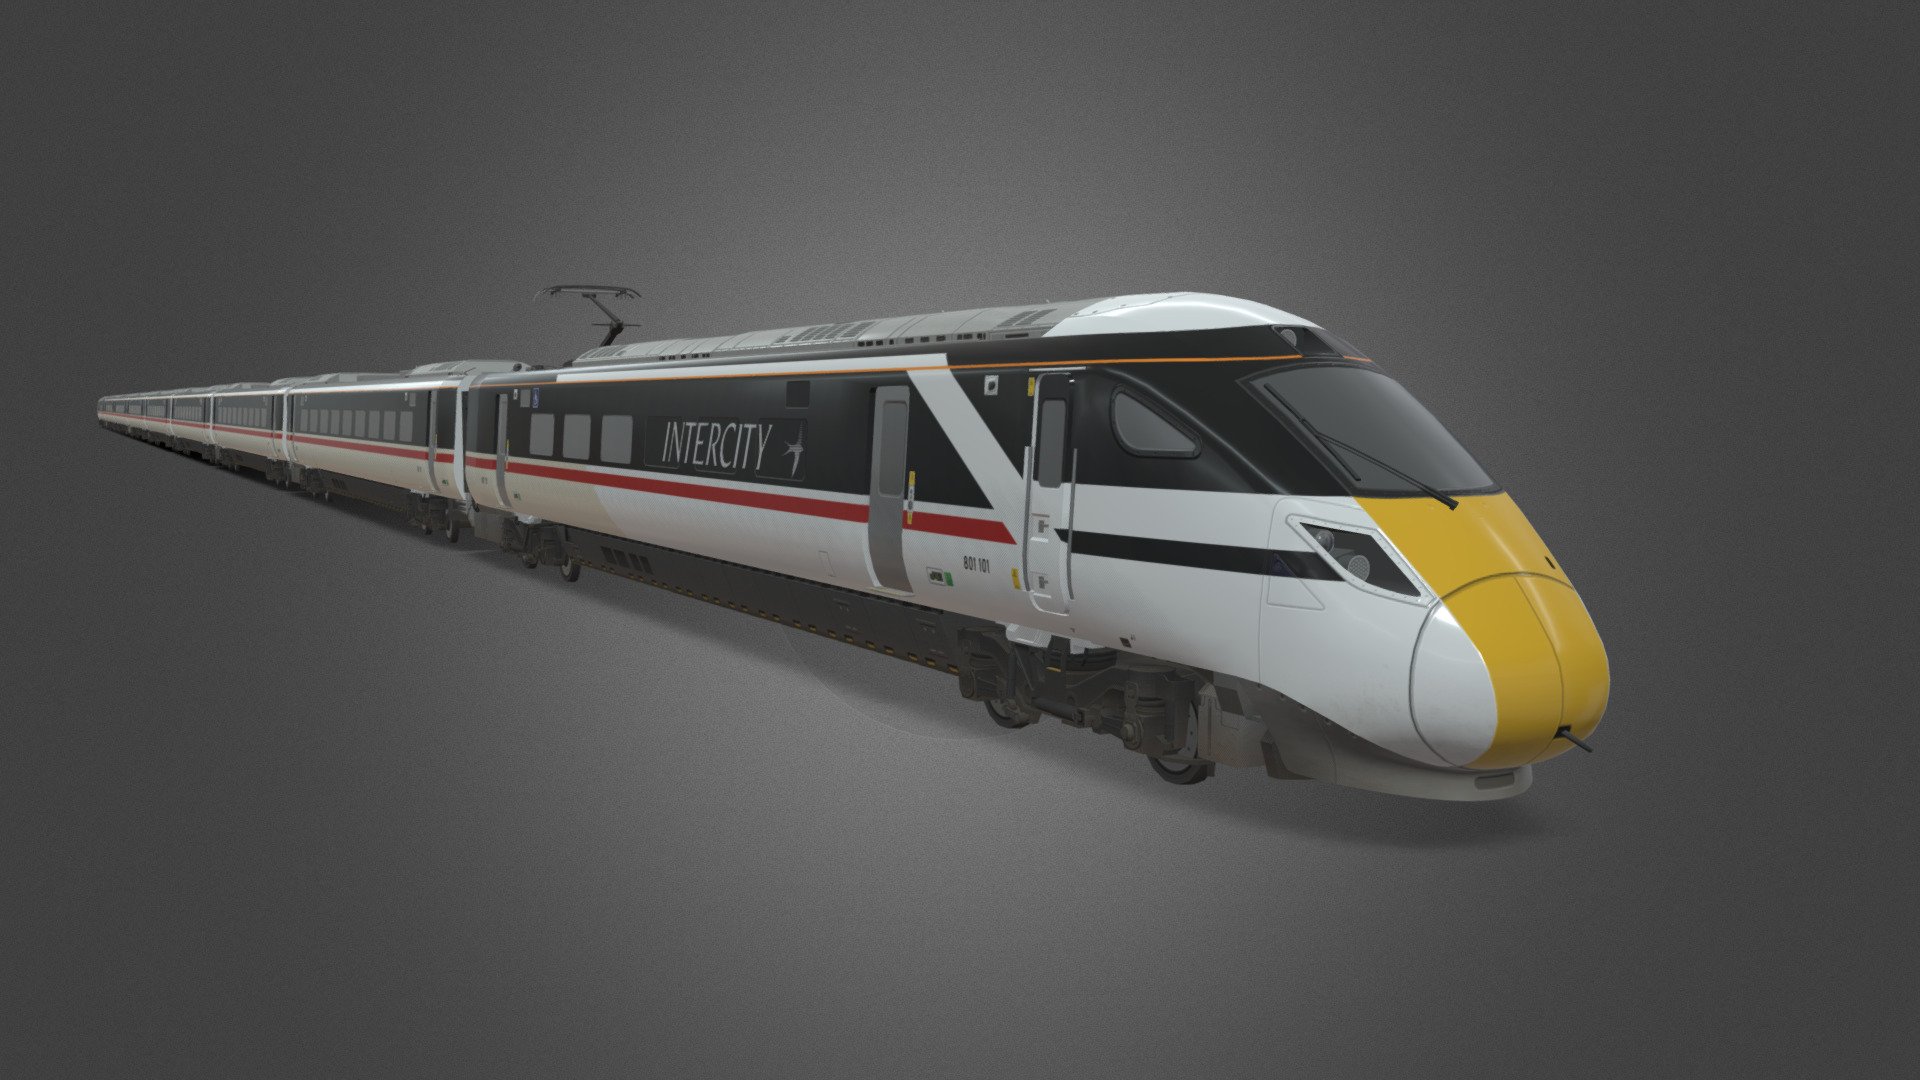 The British Rail Class 800 Intercity Express Train or Azuma is a type of bi-mode multiple unit train built by Hitachi for Great Western Railway and London North Eastern Railway. The type uses electric motors powered from overhead electric wires for traction, but also has diesel generators to enable trains to operate on unelectrified track. Based on the Hitachi A-train design, the trains were built by Hitachi between 2014 and 2018.

This train is in a fictional livery, aiming to recreate the iconic British Rail Intercity &ldquo;Swallow